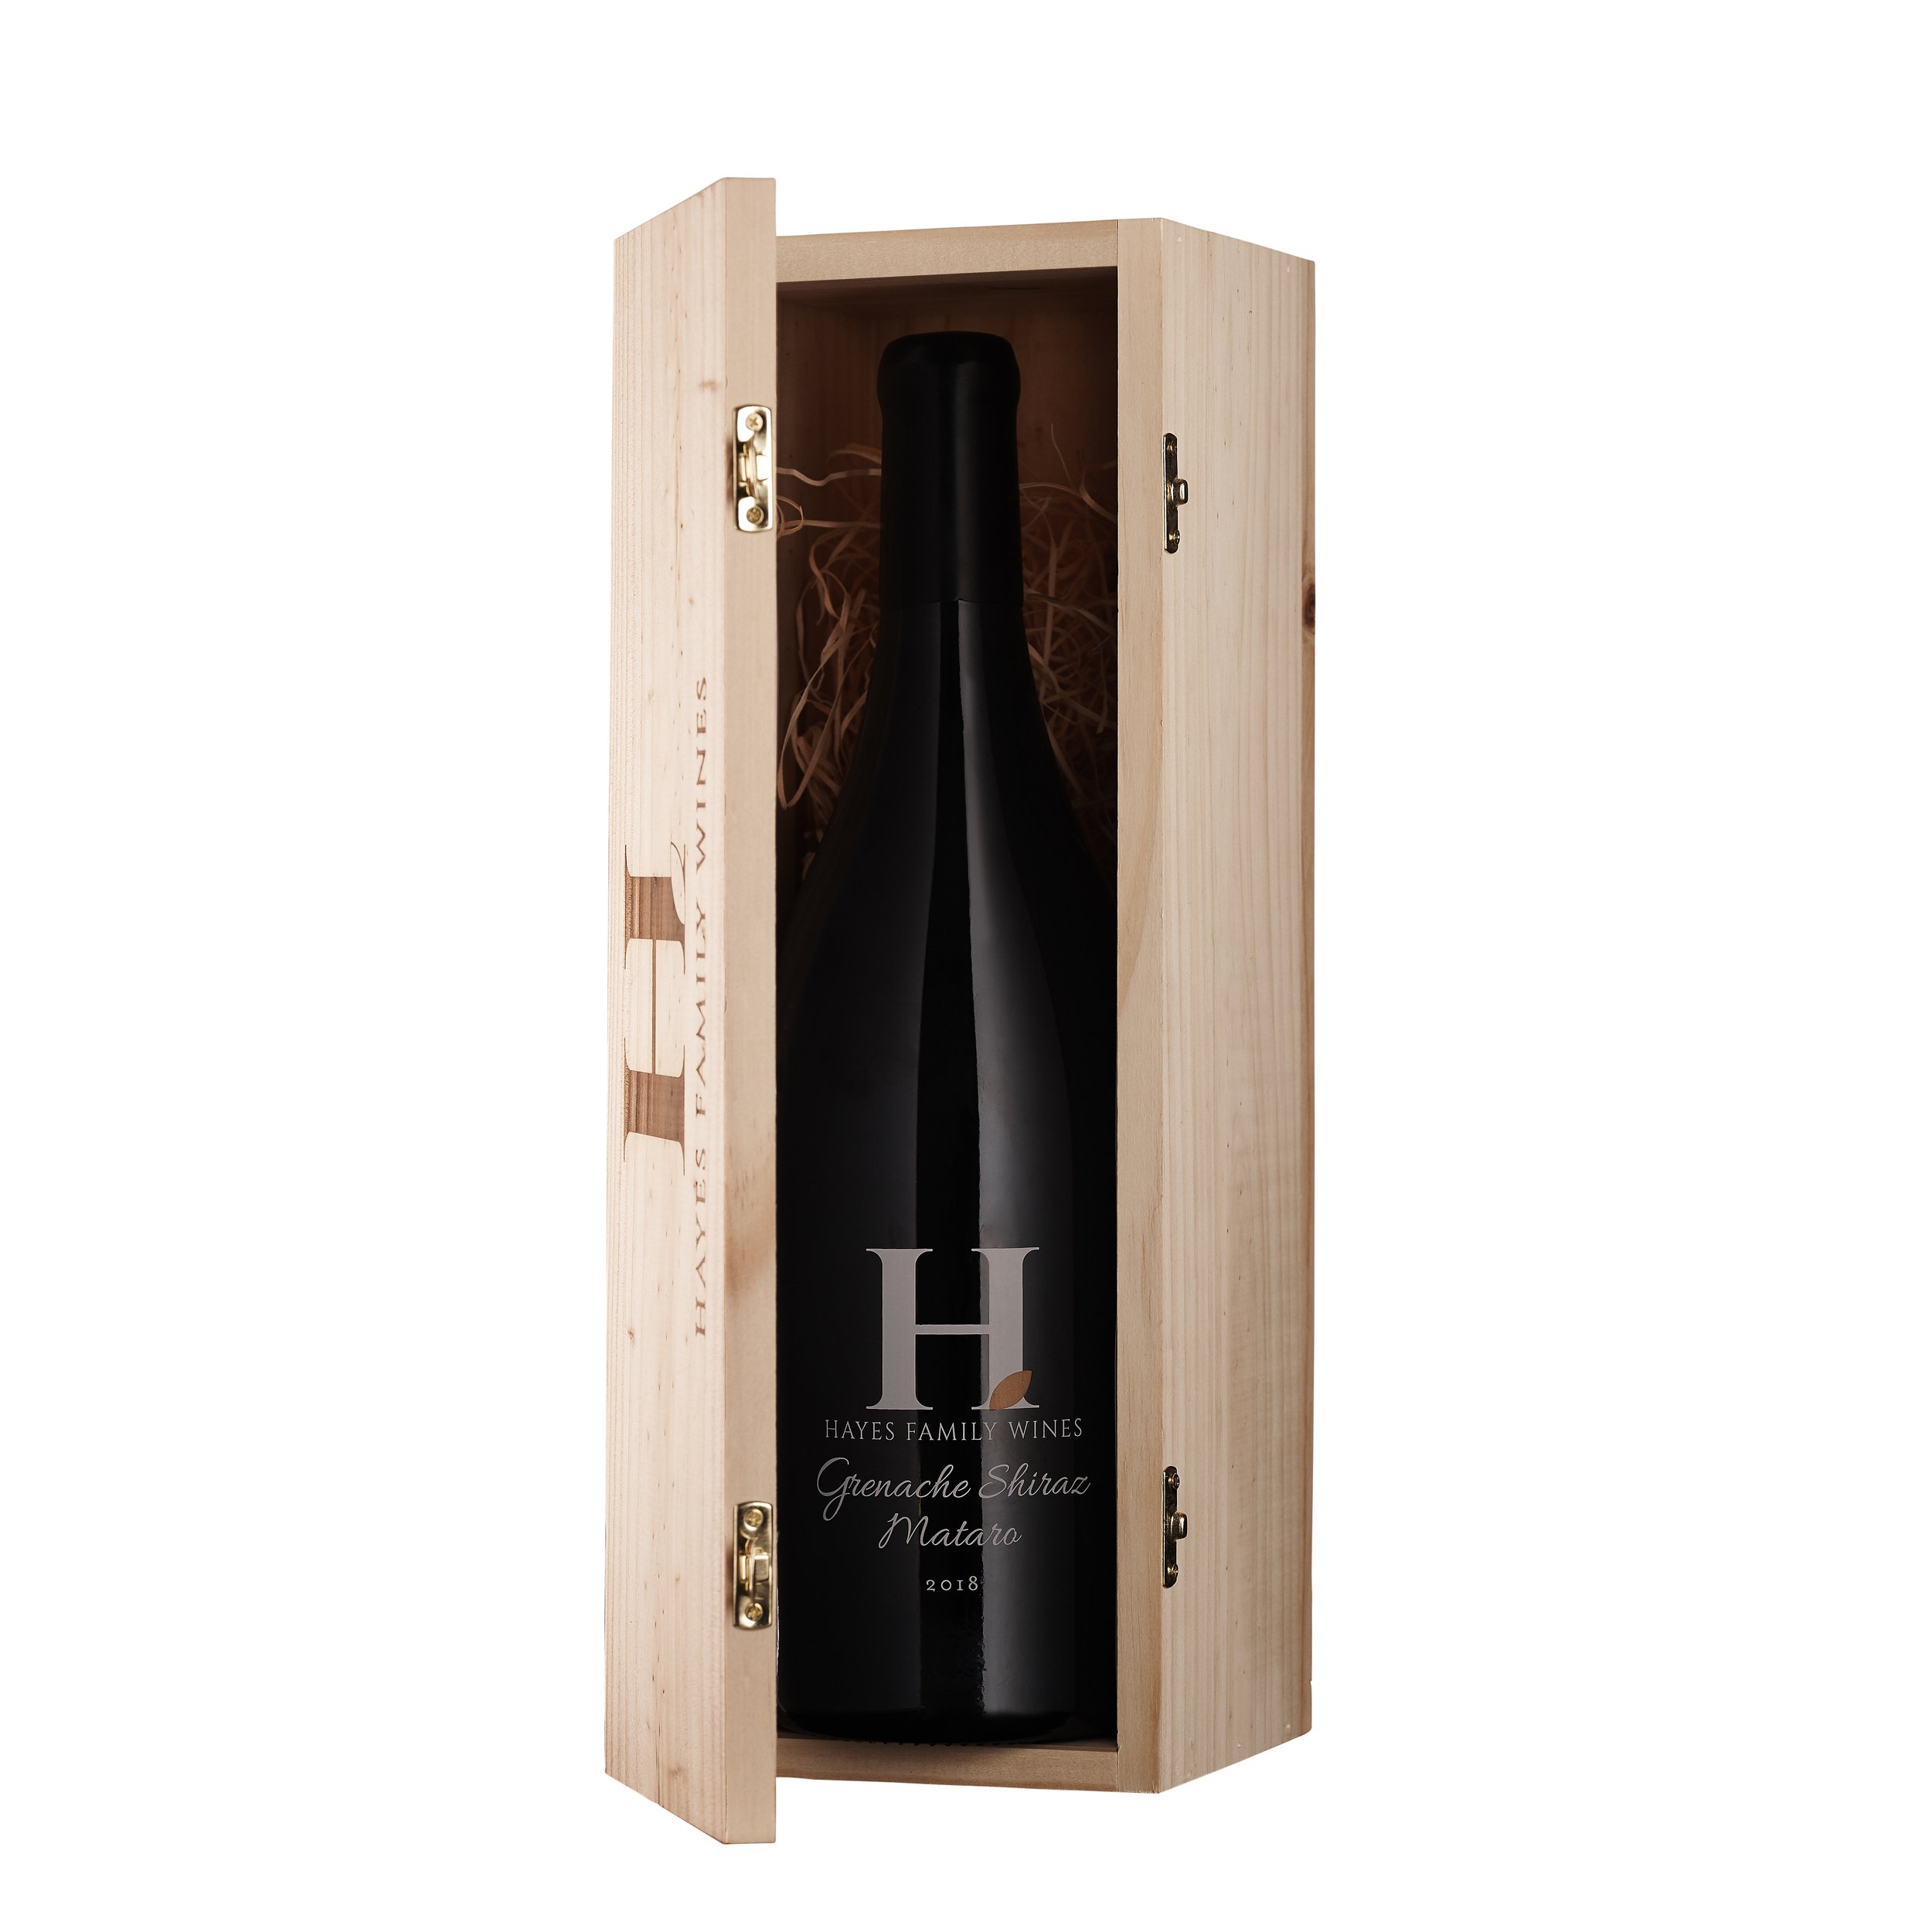 2018 Hayes Family Wines Barossa Valley GSM Magnum.jpg